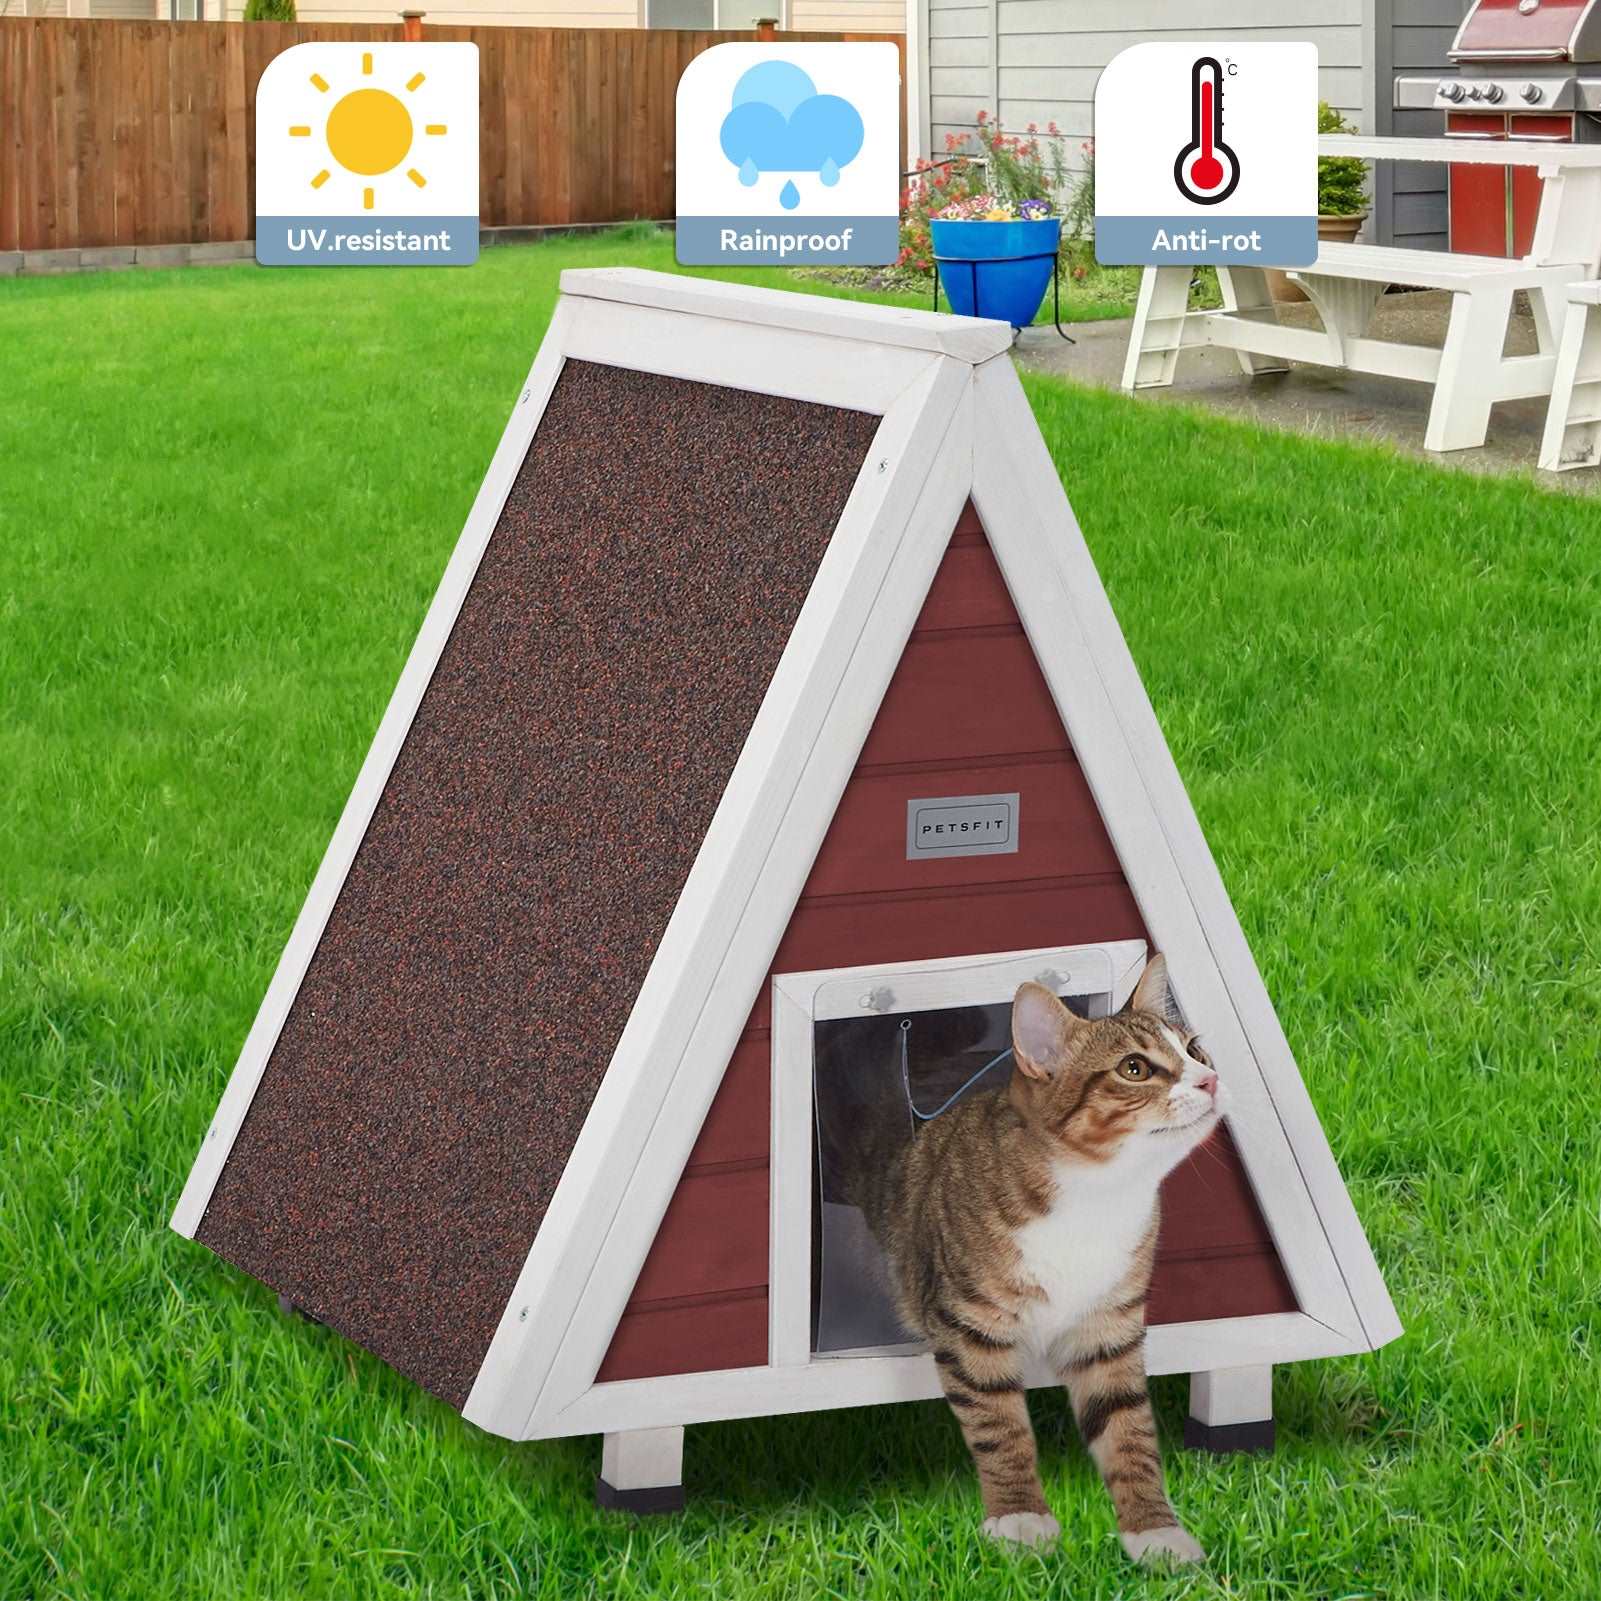 PETSFIT-Single-Story-Triangular-Cat-House-With-Foot-Stand-06